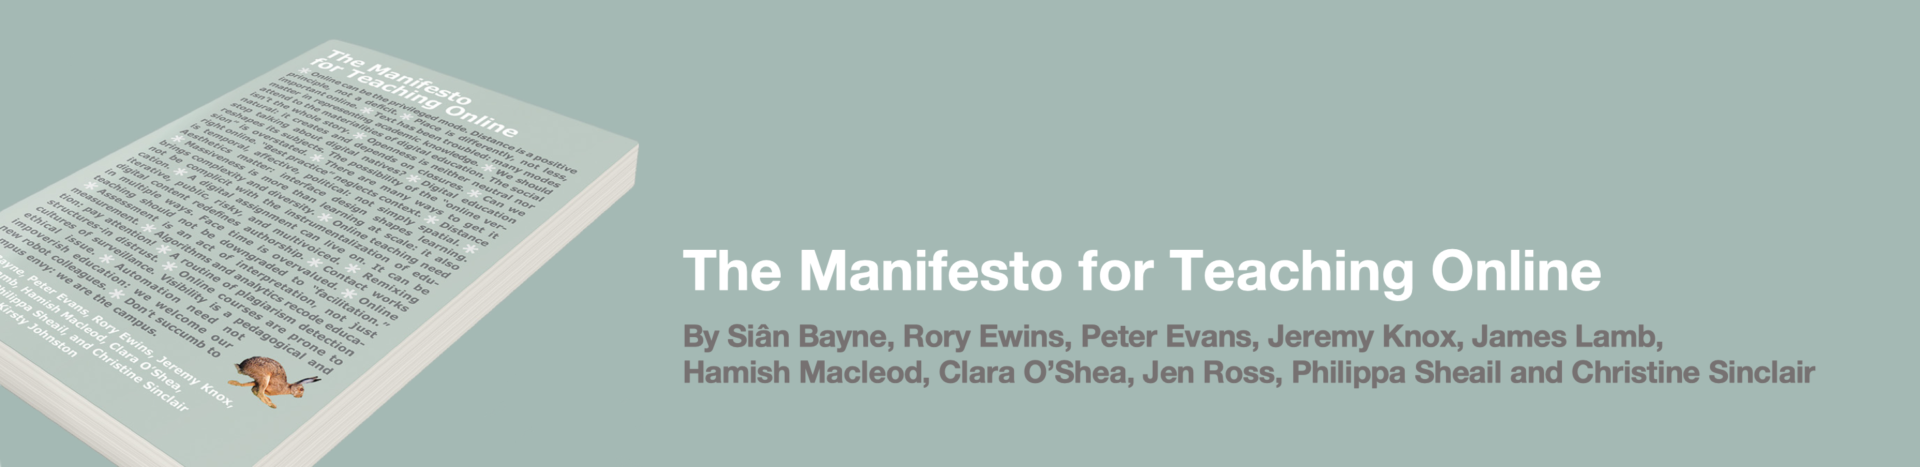 Now available: The Manifesto for Teaching Online (the book) – and launch events